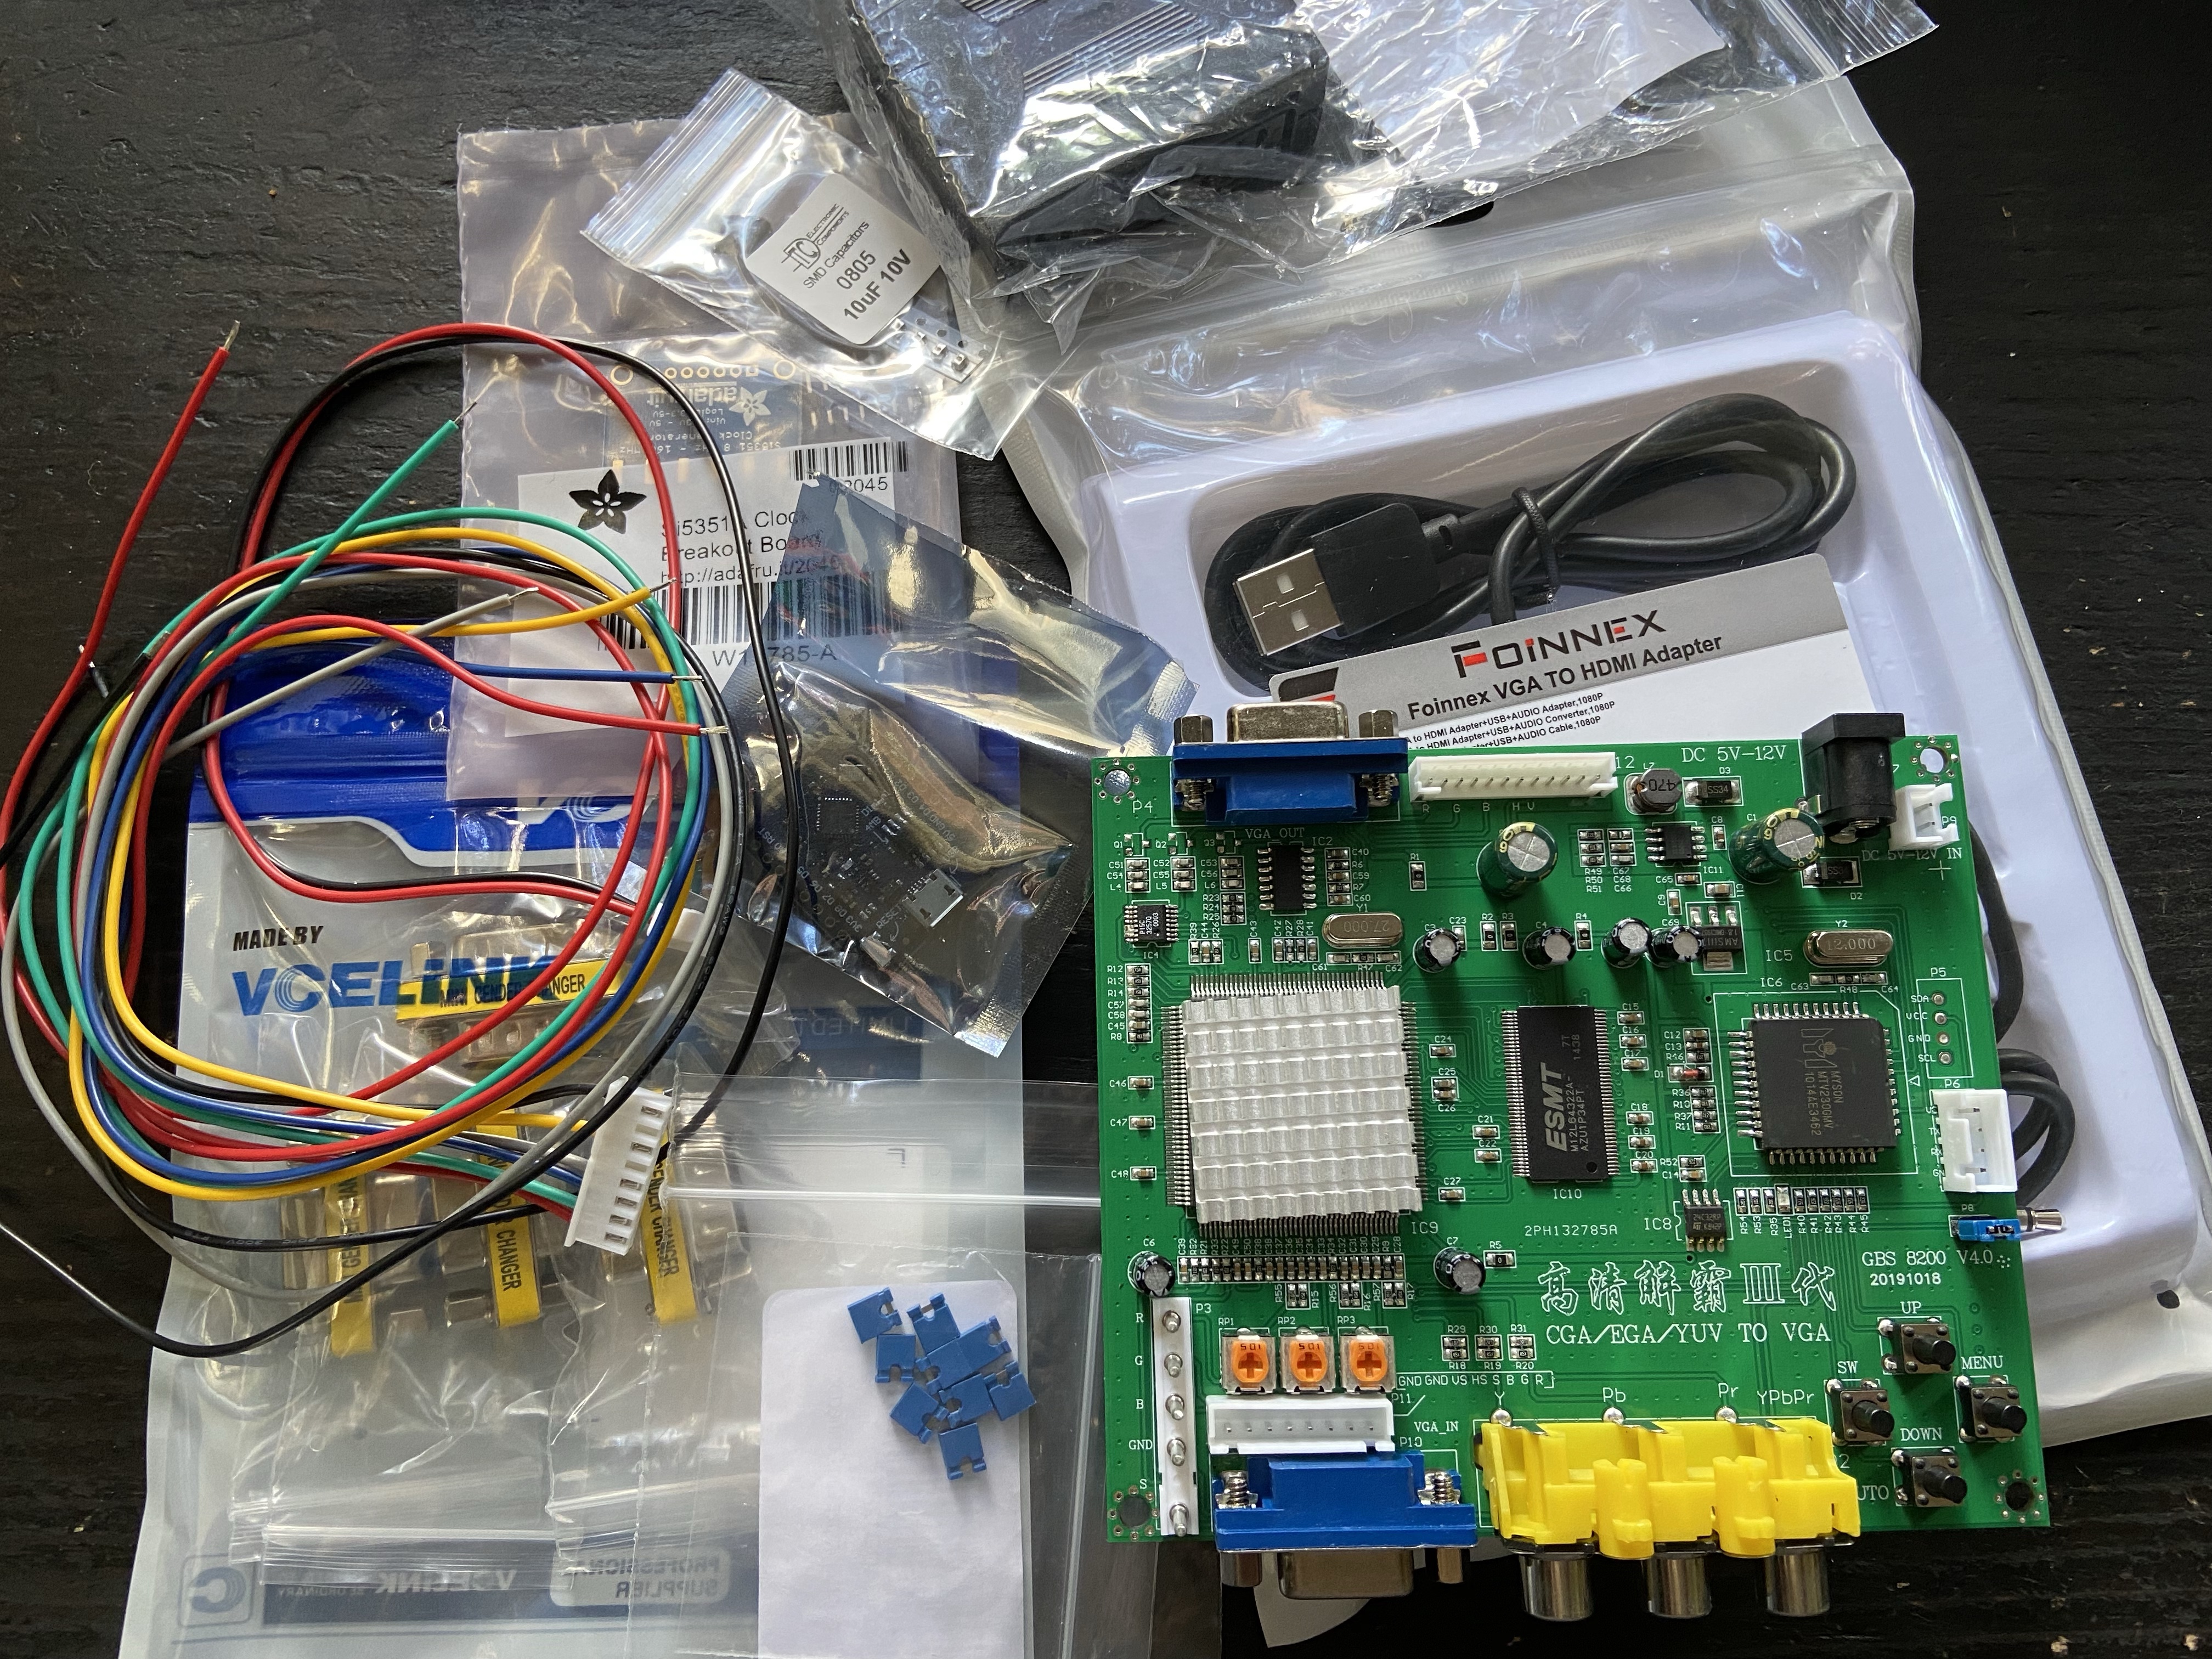 GBS8200 board and parts to build a better scaler